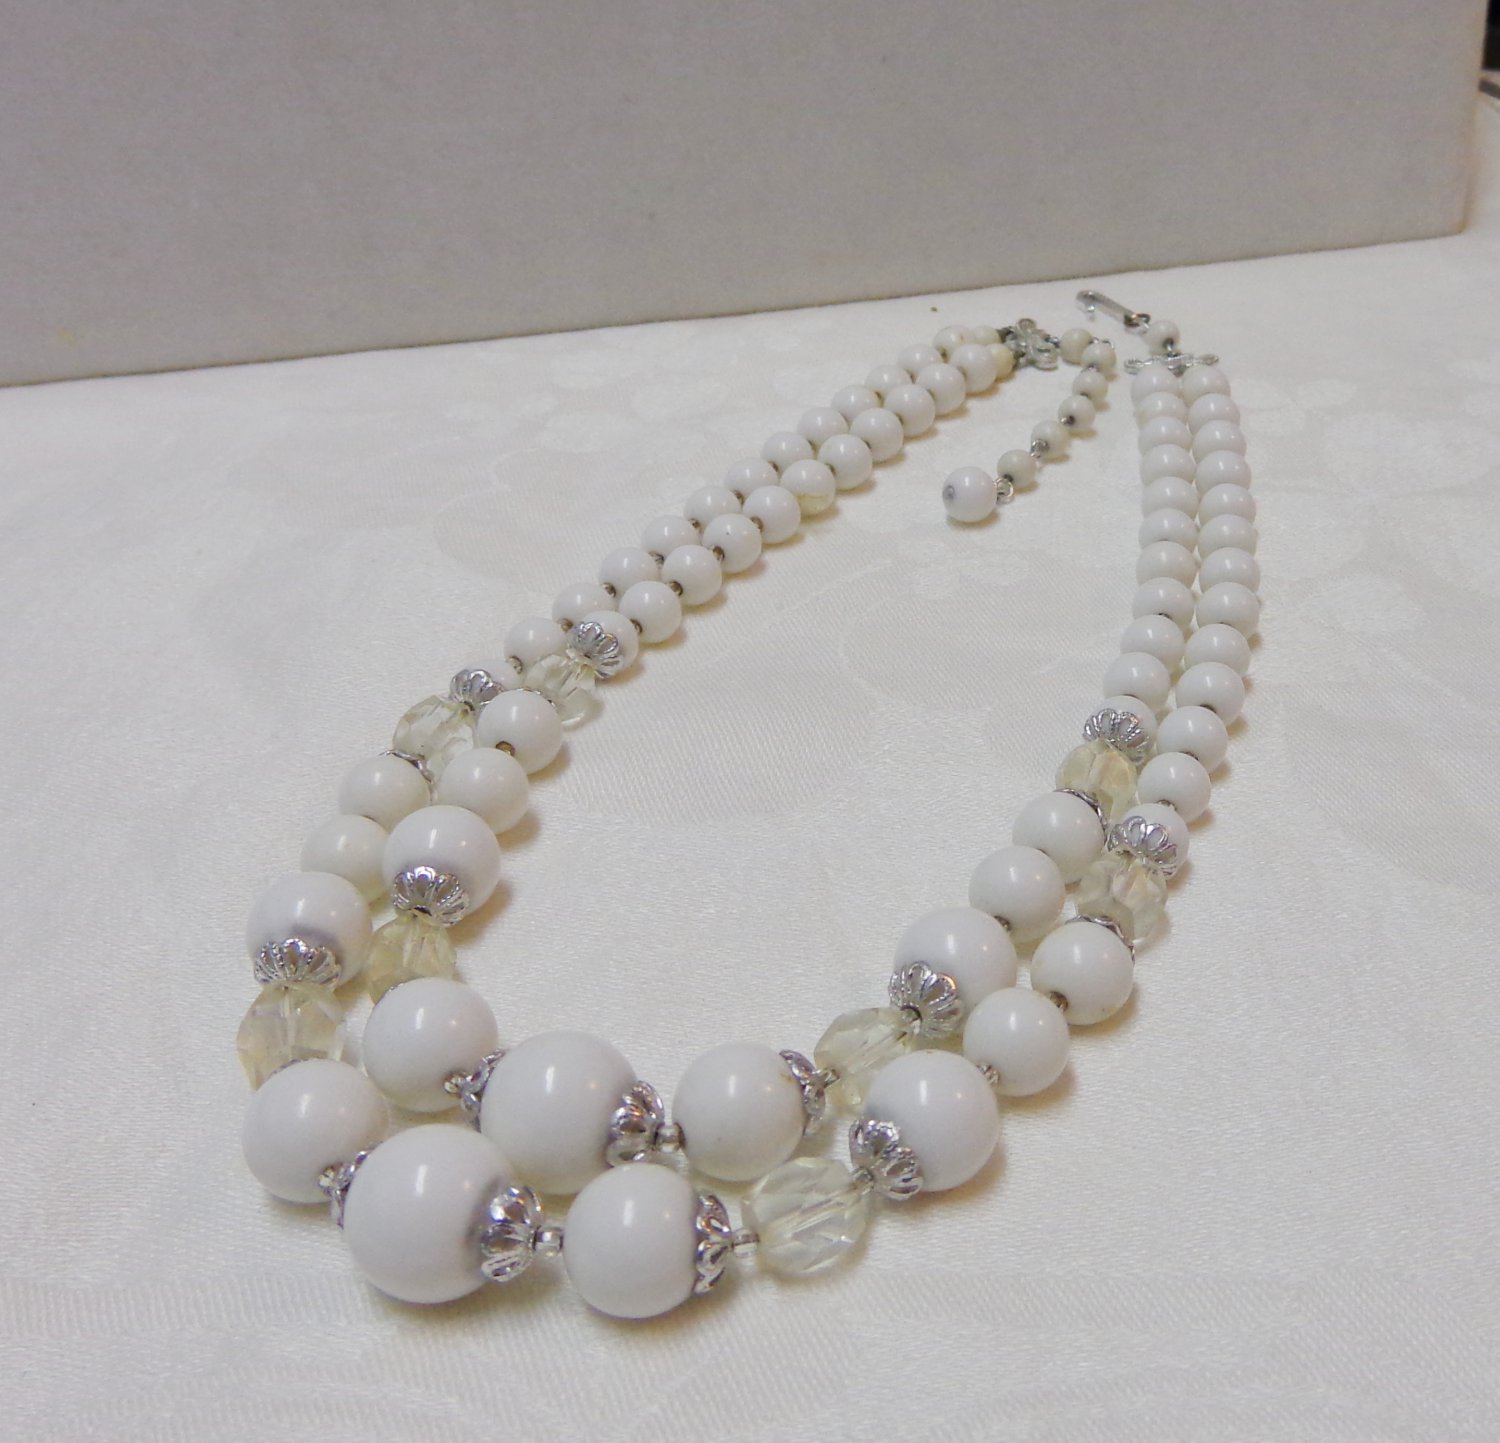 White and clear 2 strand necklace plastic beads made Japan vintage ll3306